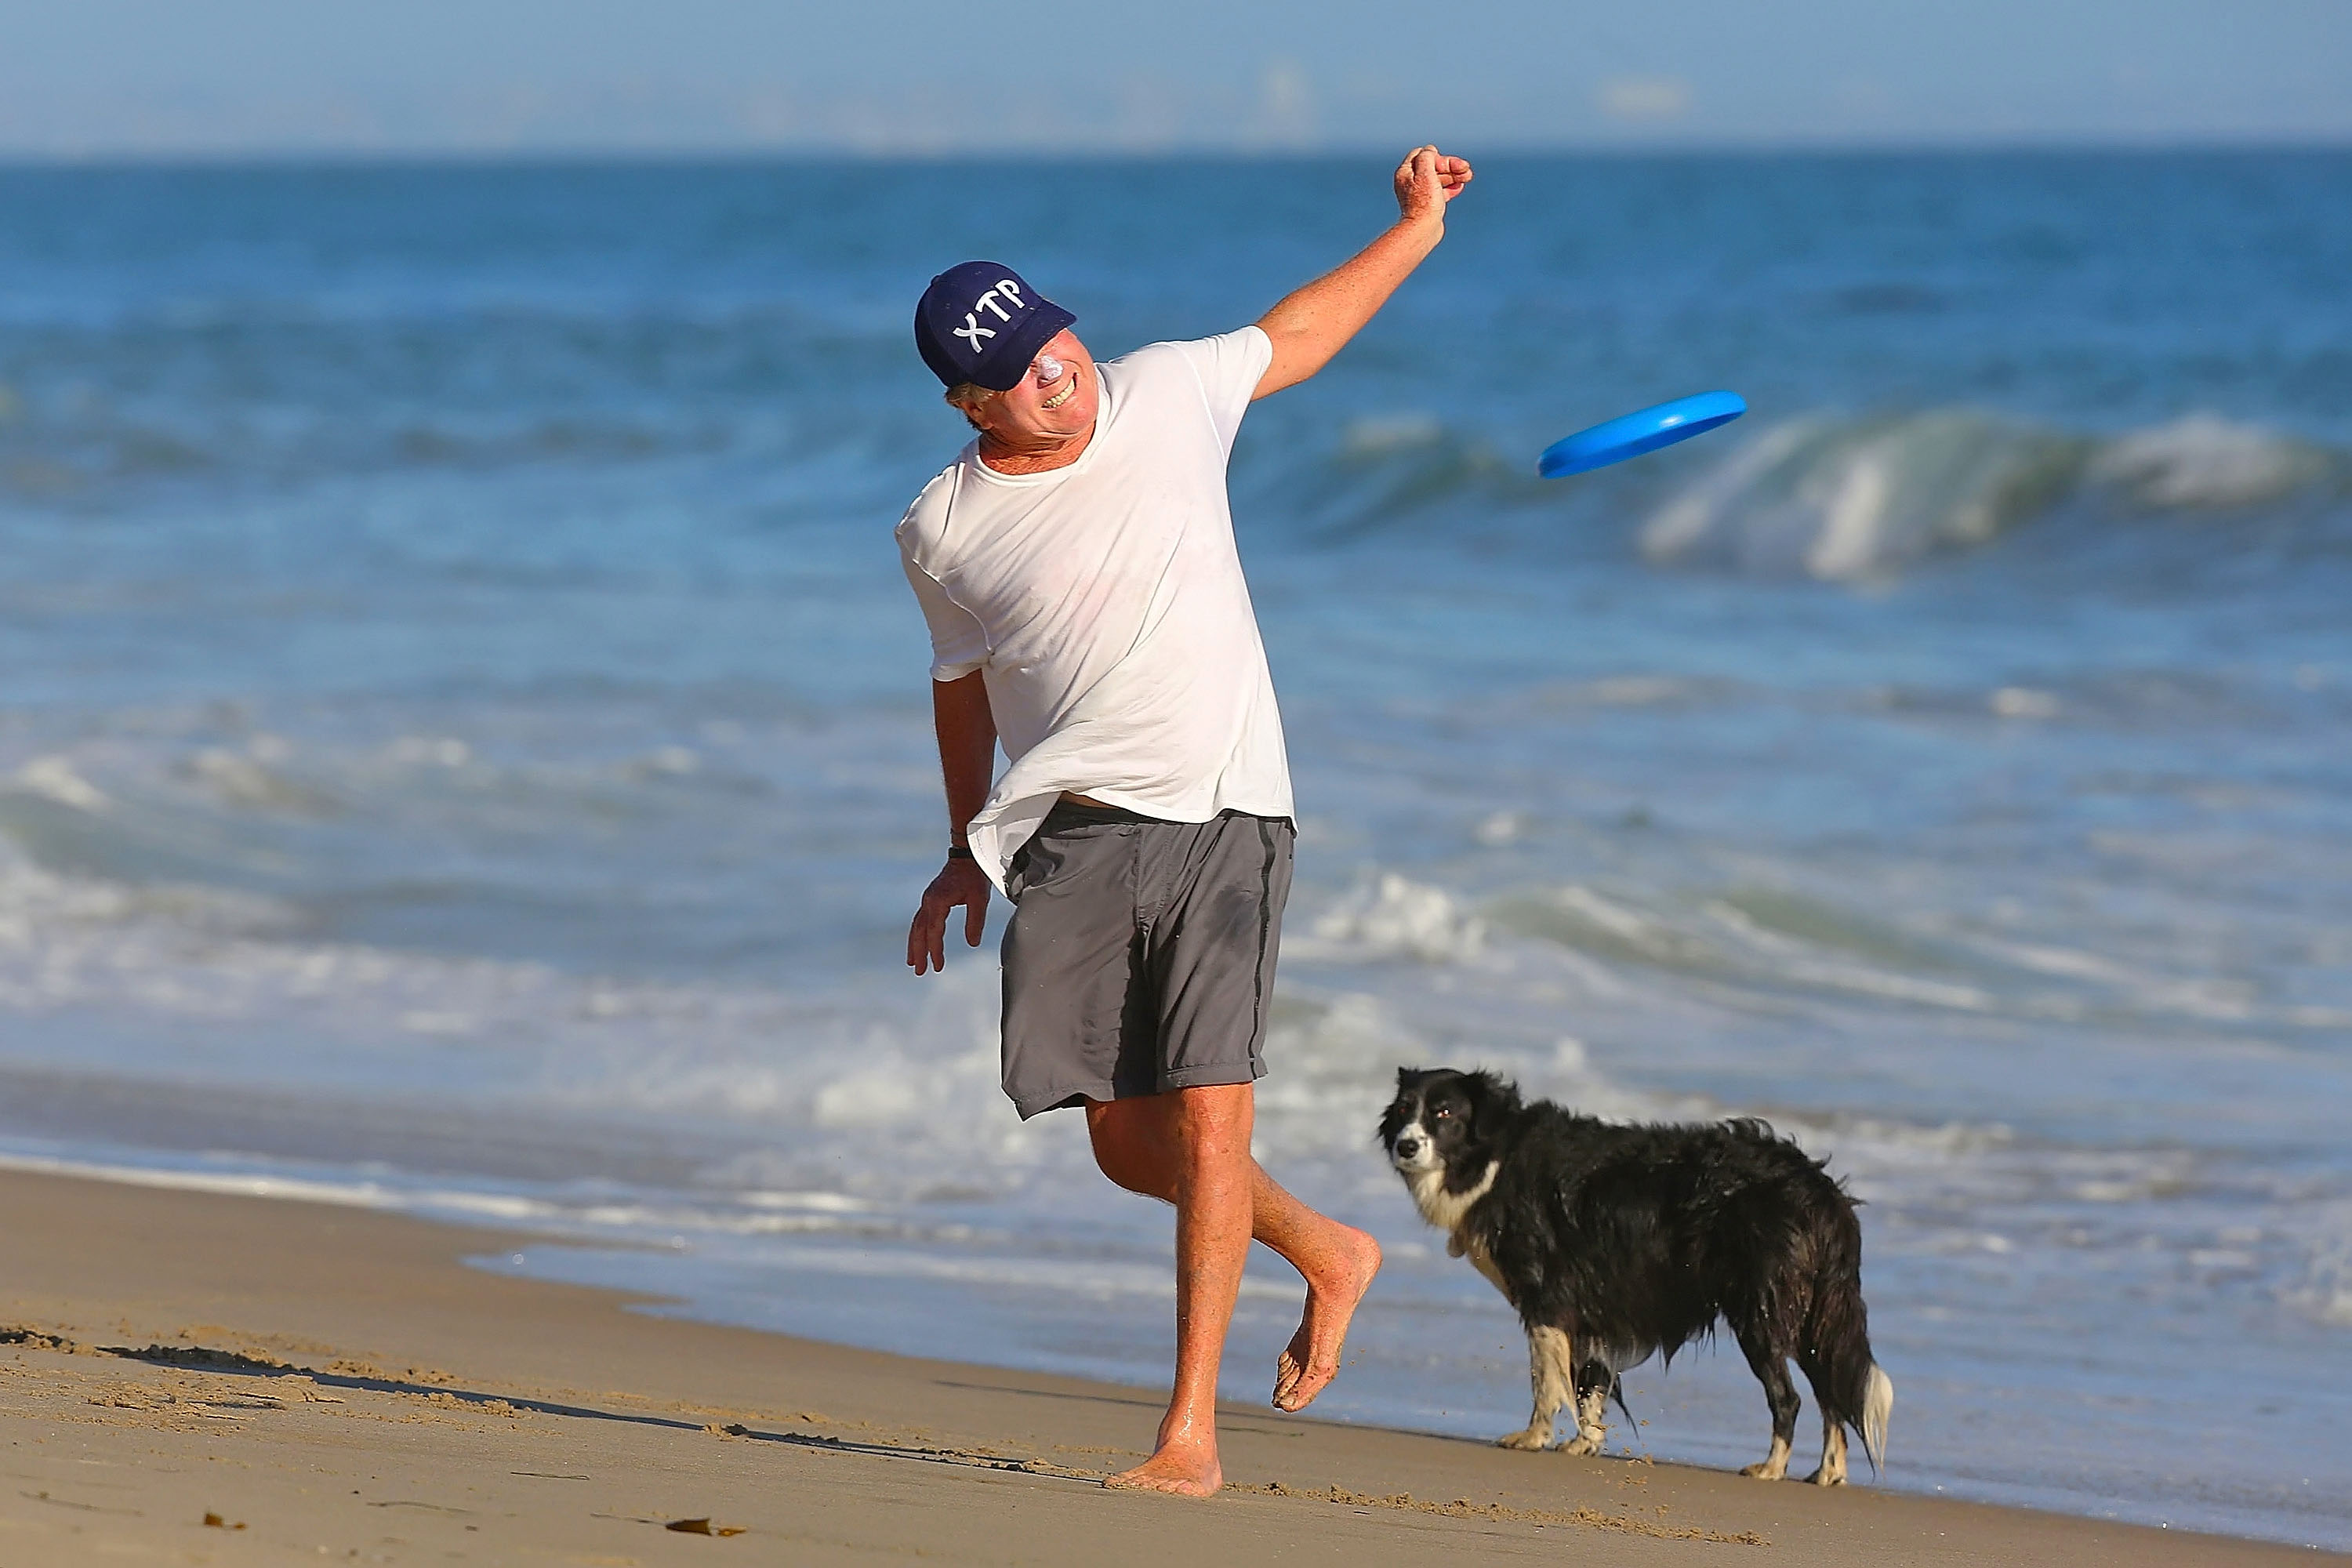 Ryan O'Neal seen at a beach in Malibu in Los Angeles, California on September 03, 2012 | Source: Getty Images